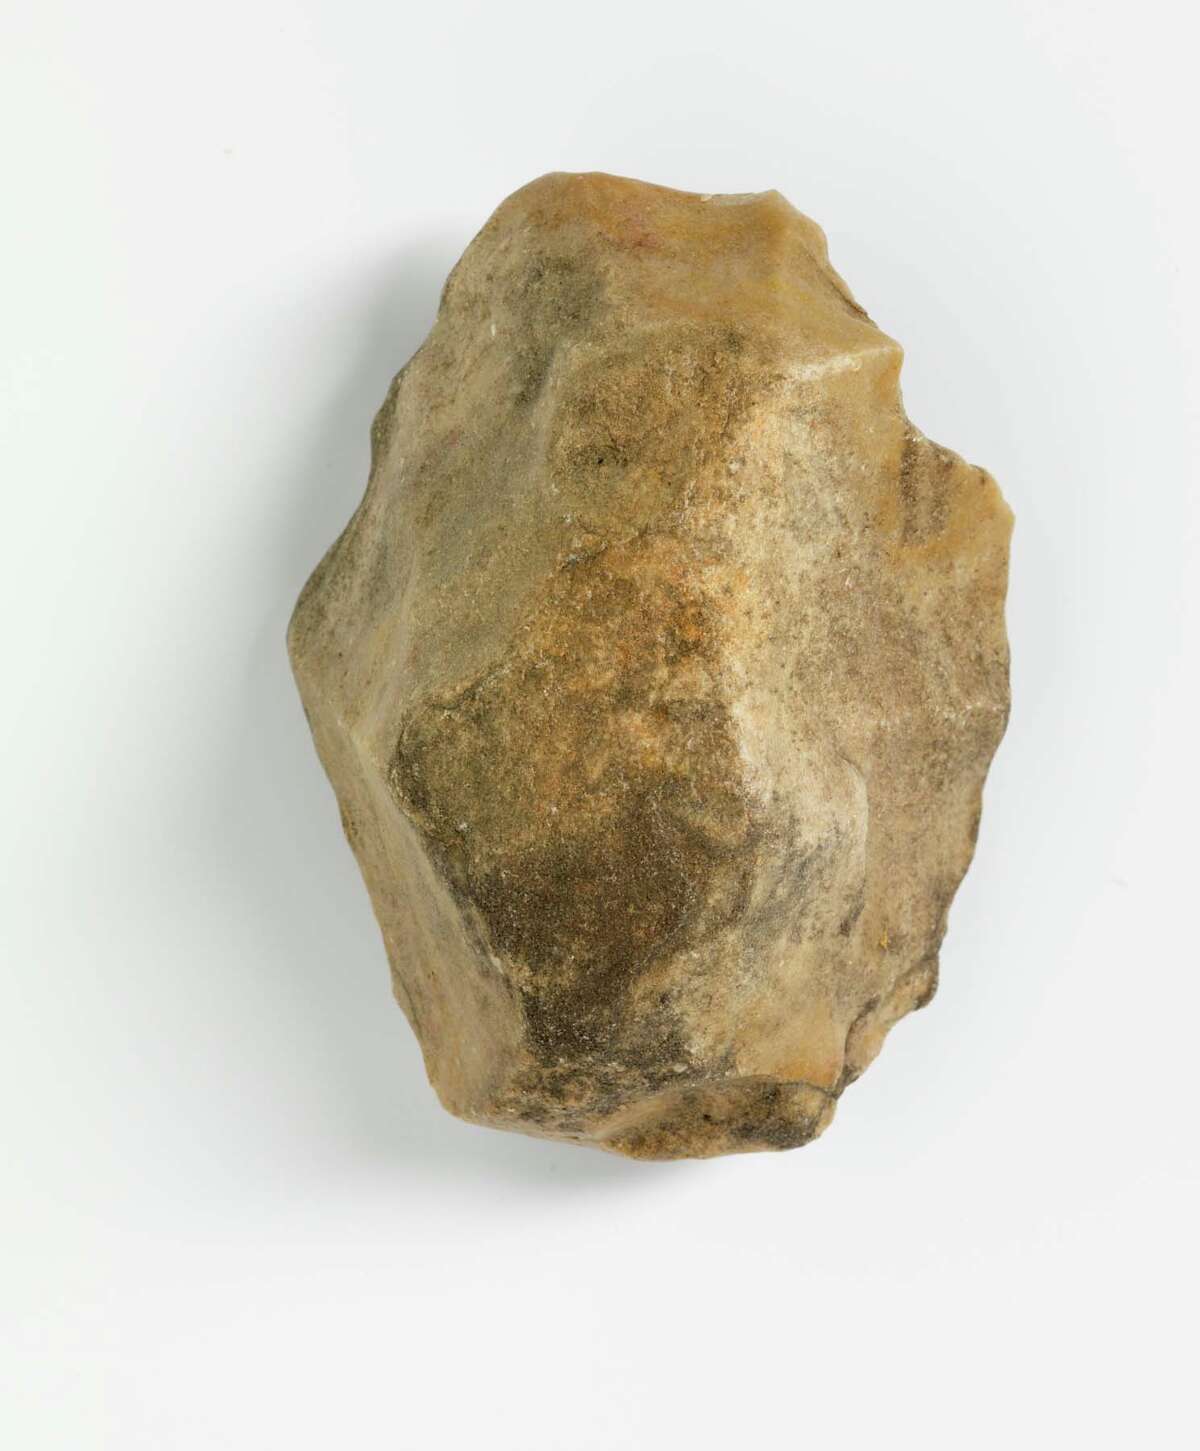 Quartzite from the Early Lower Paleolithic period is part of the “Roads of Arabia” exhibition at the Asian Art Museum.